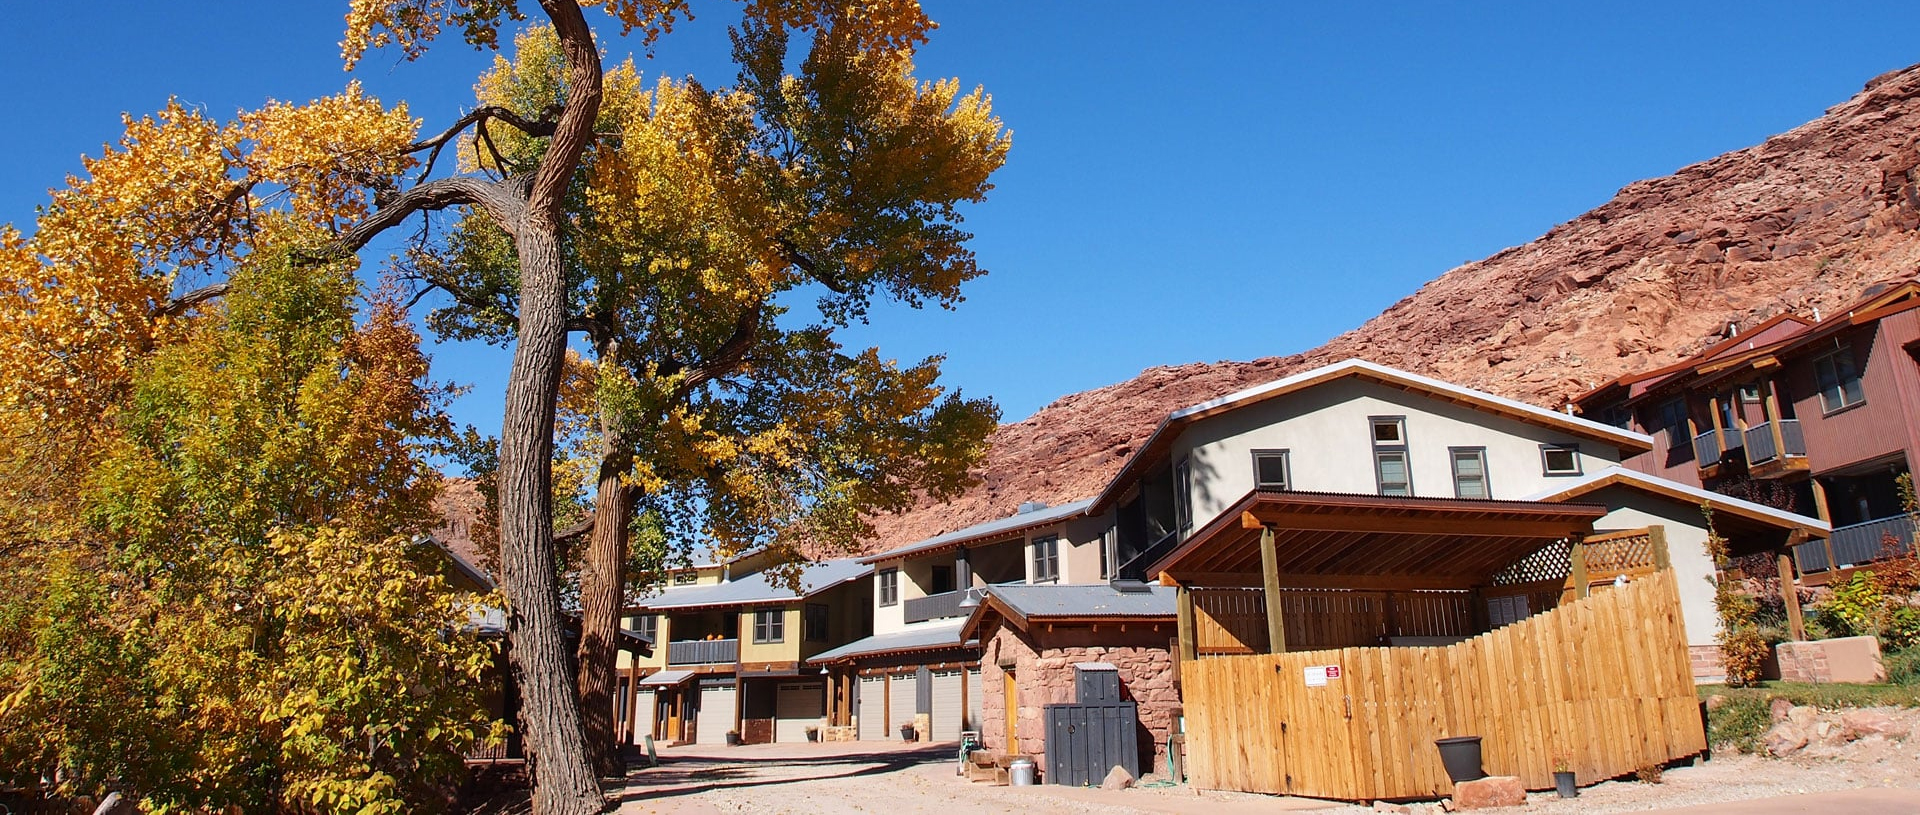 Tall majestic trees bearing orange and yellow leaves tower above triangular shaped roofs of townhomes at Moab Springs Ranch under bright blue skies.